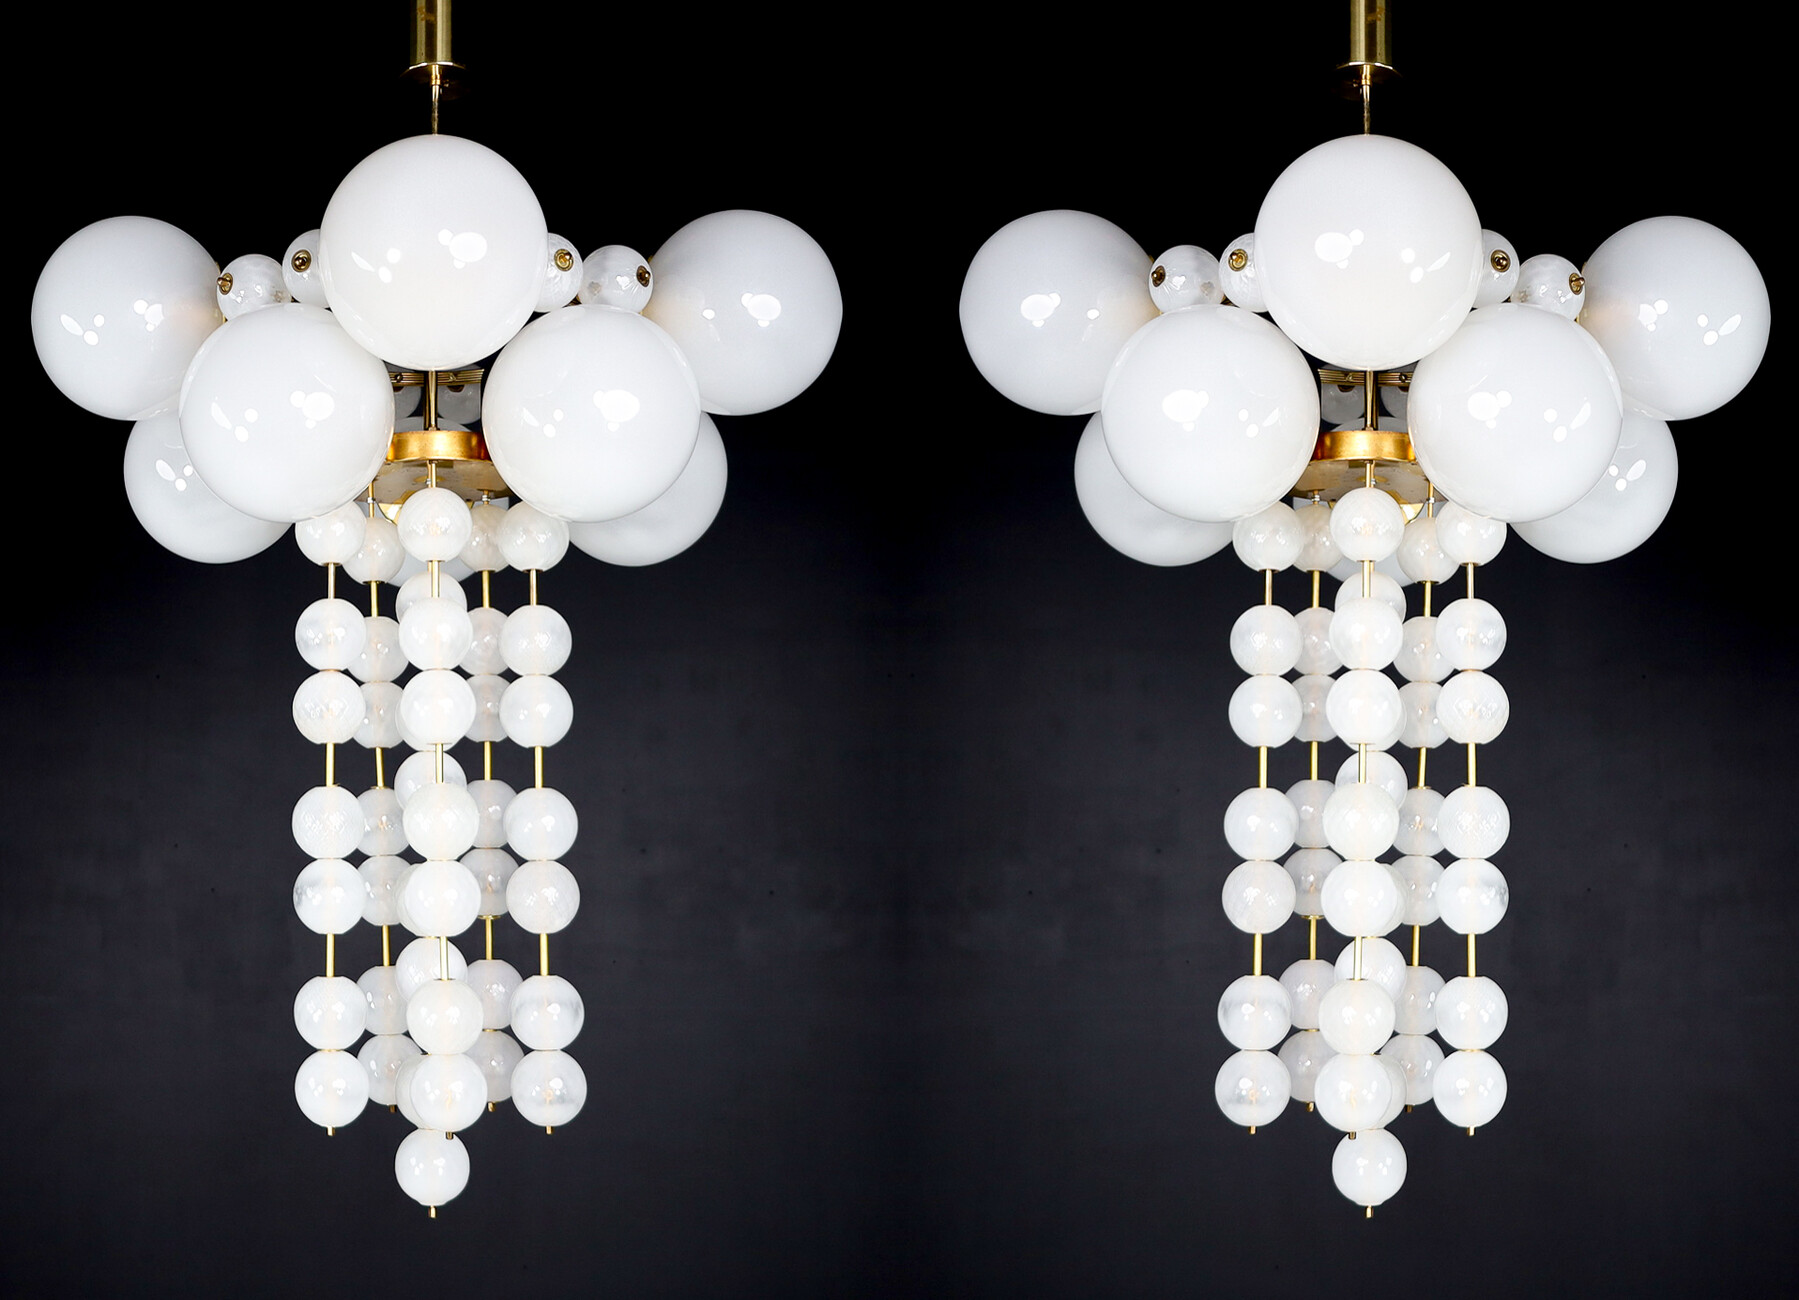 Mid century modern Grand Bohemian Chandeliers With Brass Fixture And Hand-Blowed Frosted Glass Globes, 1960s Mid-20th century